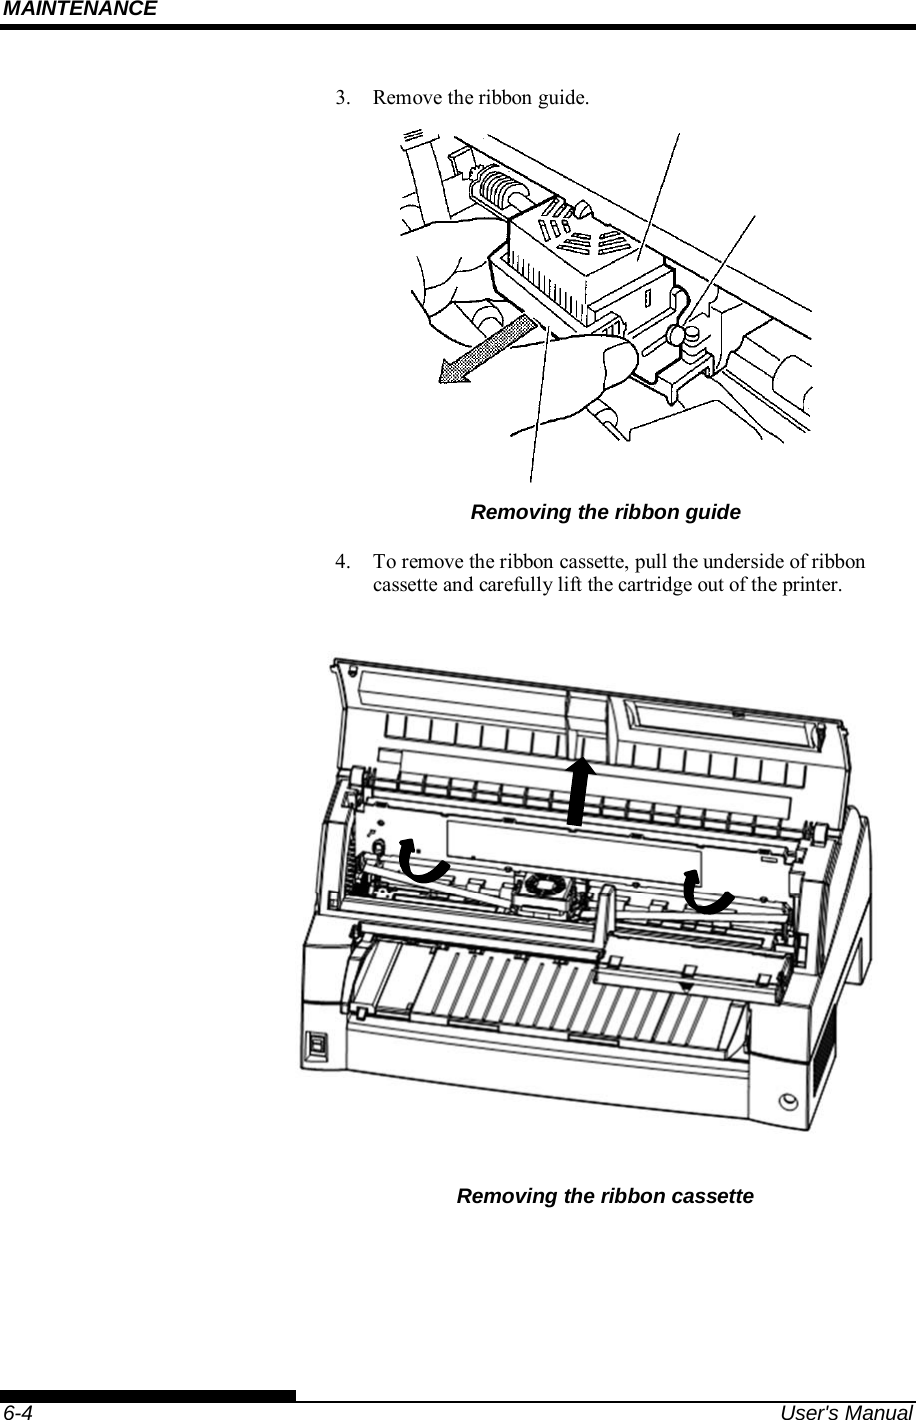 MAINTENANCE    6-4  User&apos;s Manual 3.  Remove the ribbon guide.  Removing the ribbon guide 4.  To remove the ribbon cassette, pull the underside of ribbon cassette and carefully lift the cartridge out of the printer.   Removing the ribbon cassette    